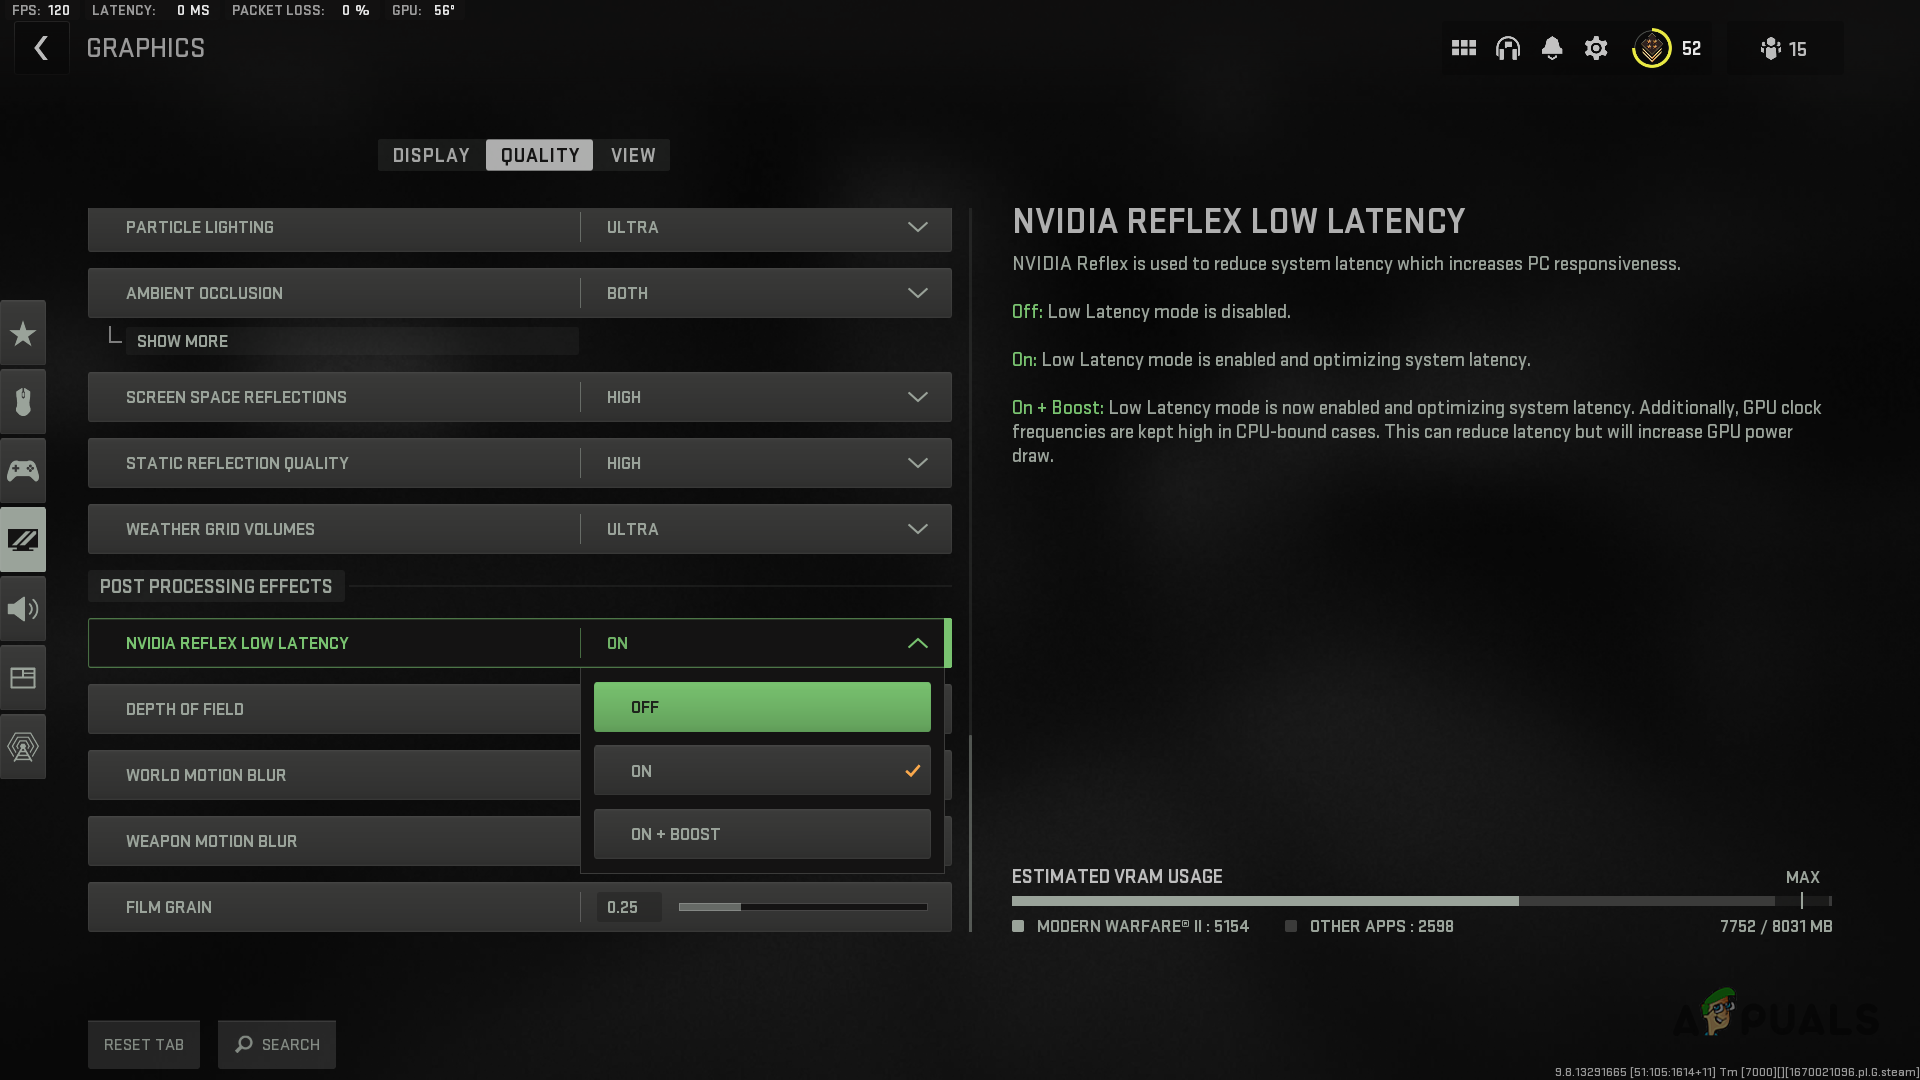 Turning off NVIDIA Reflex Low Latency